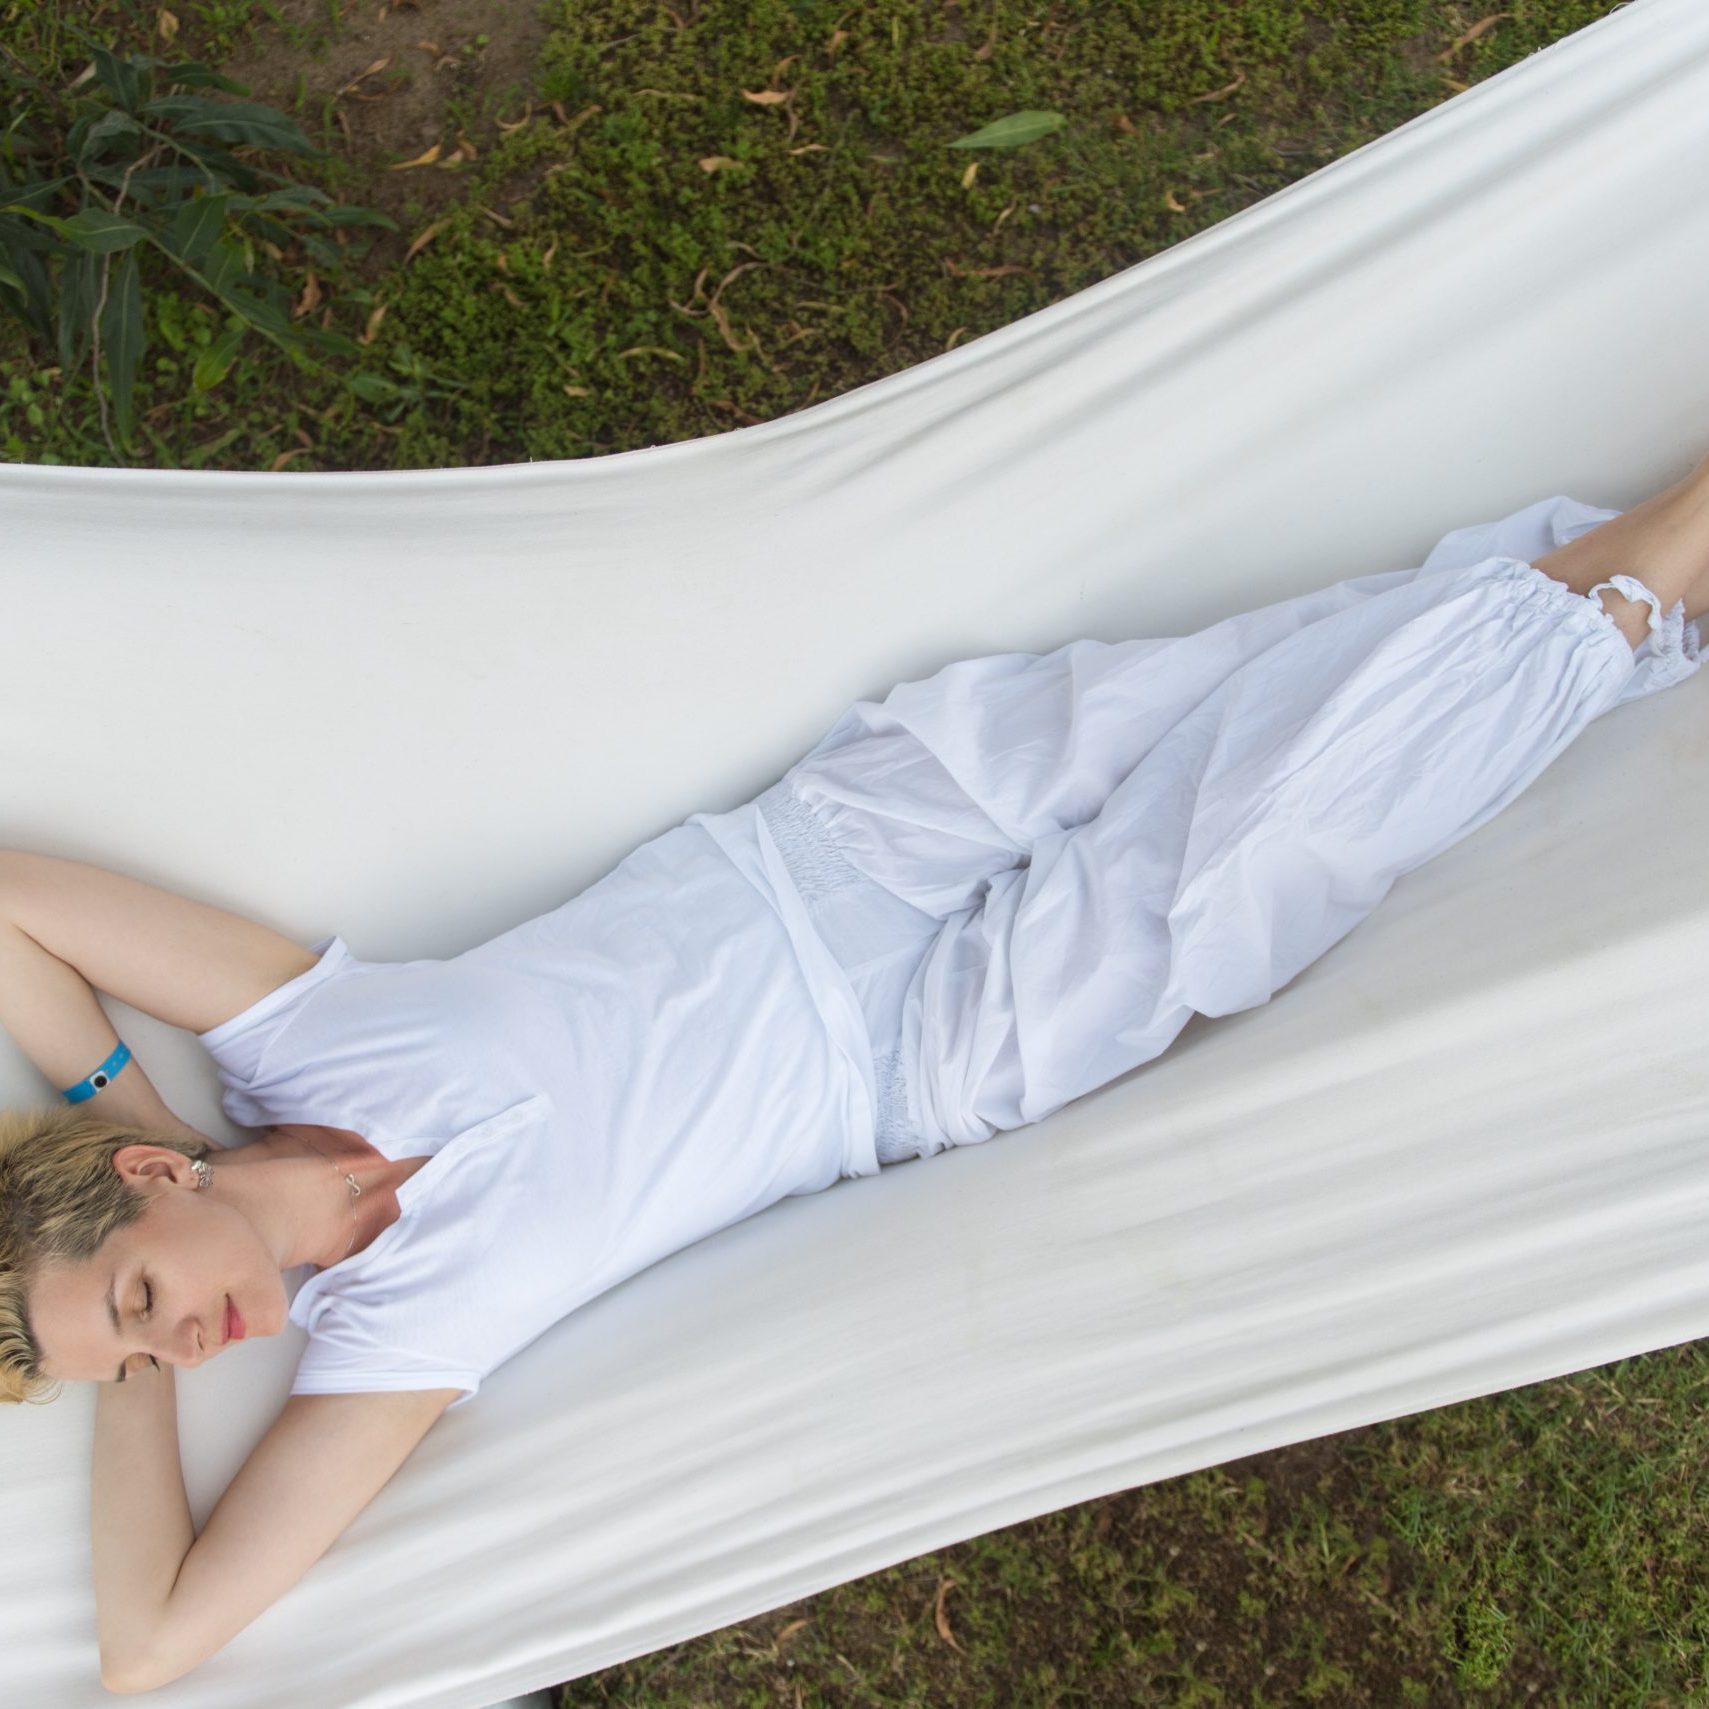 beautiful young woman enjoying free time while resting on white hammock in the backyard